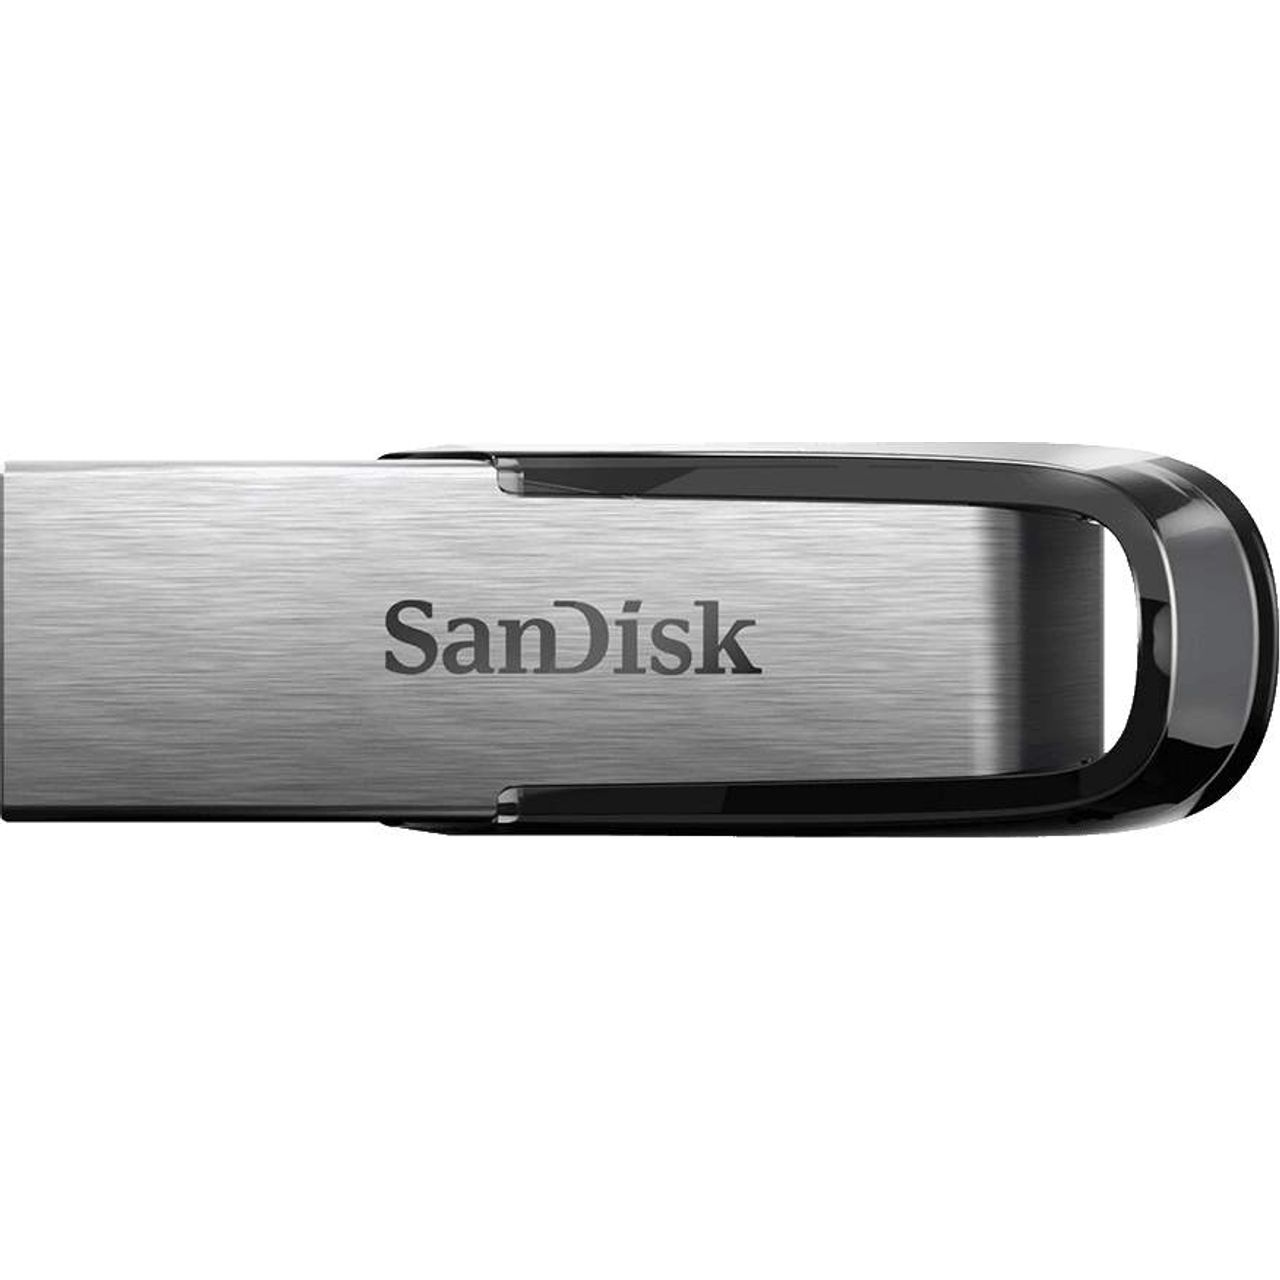 Sandisk Review